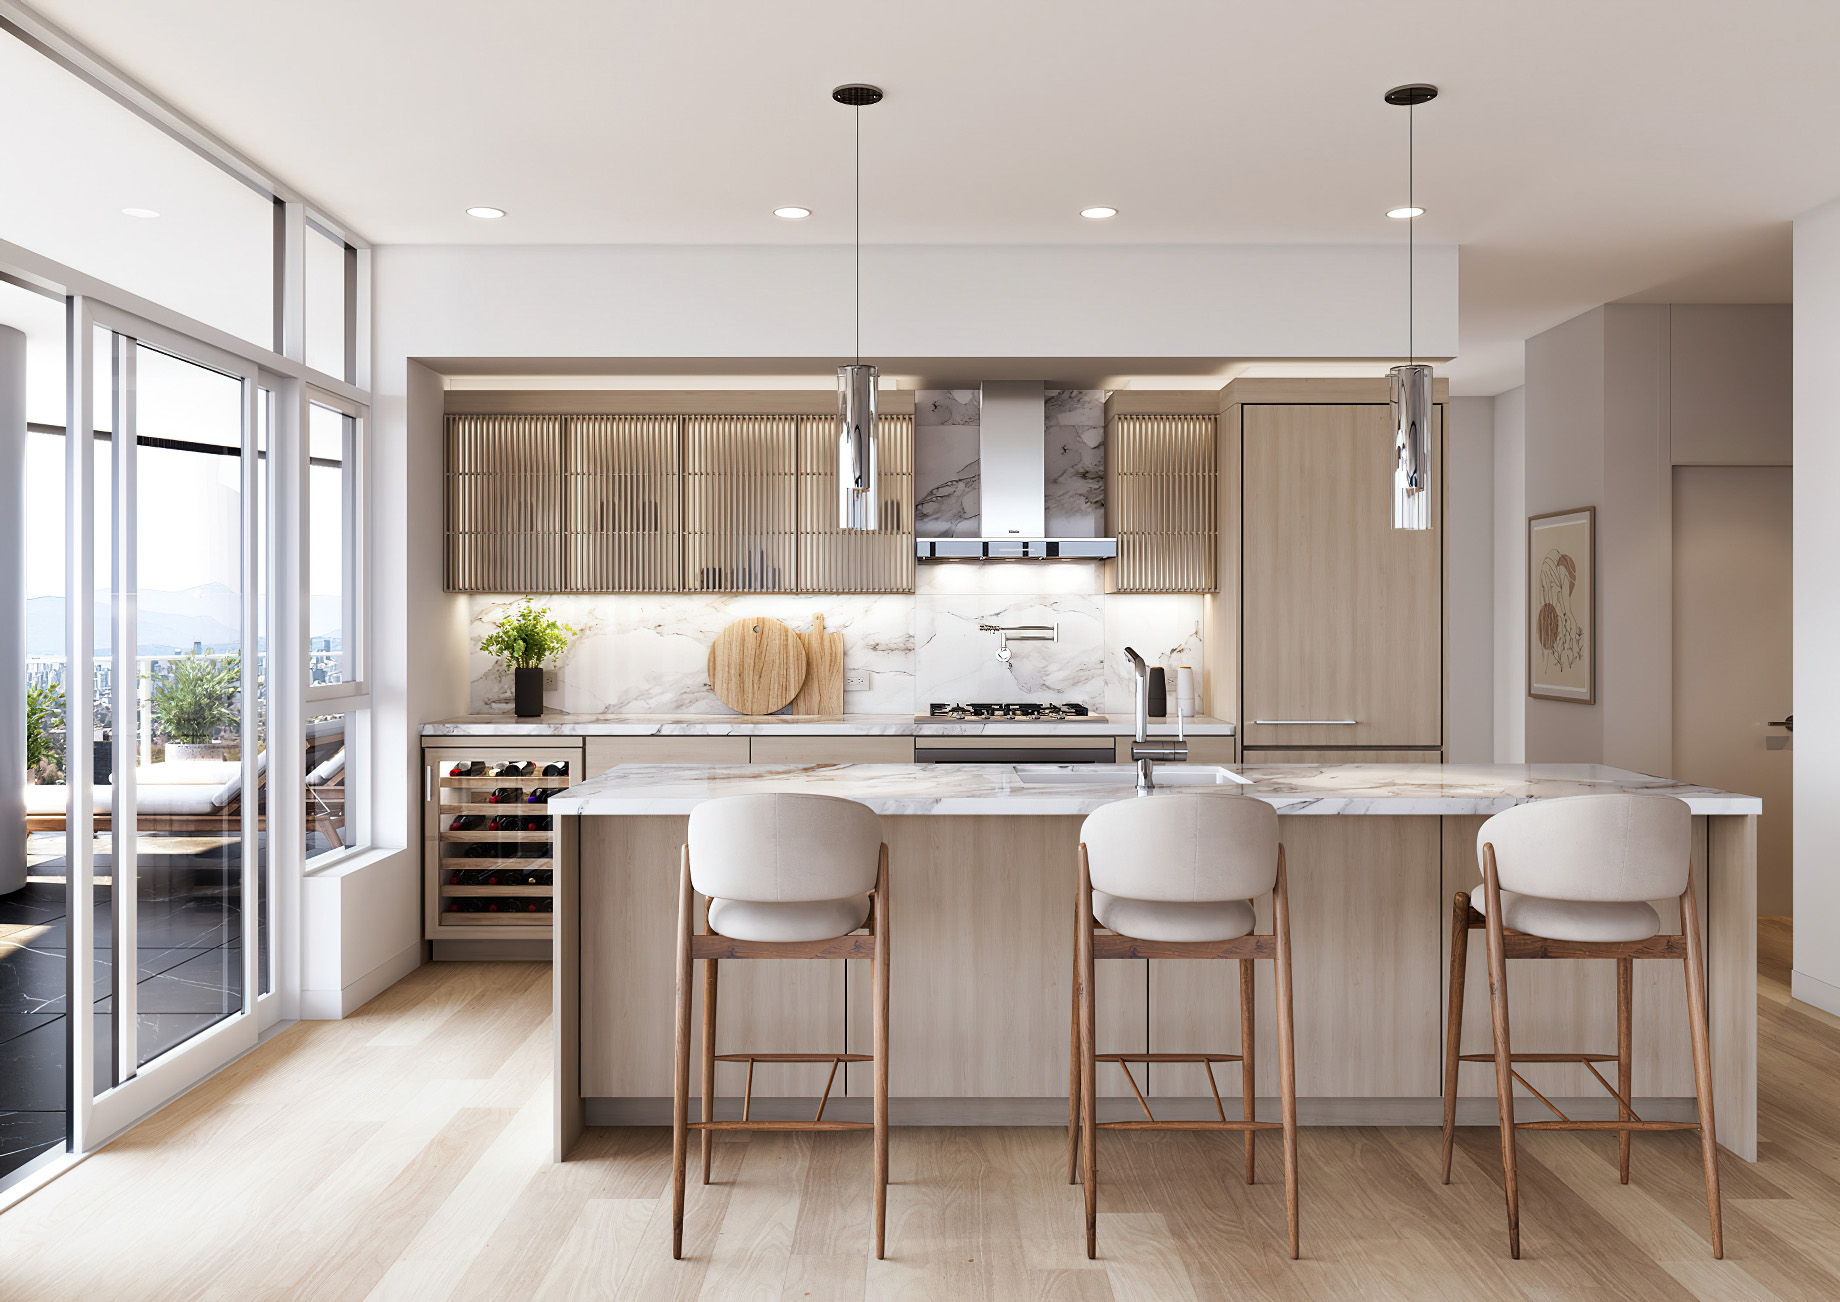 Luxurious Interiors – GREENHOUSE Brings Sophisticated Luxury Condo Living to Burnaby’s Metrotown